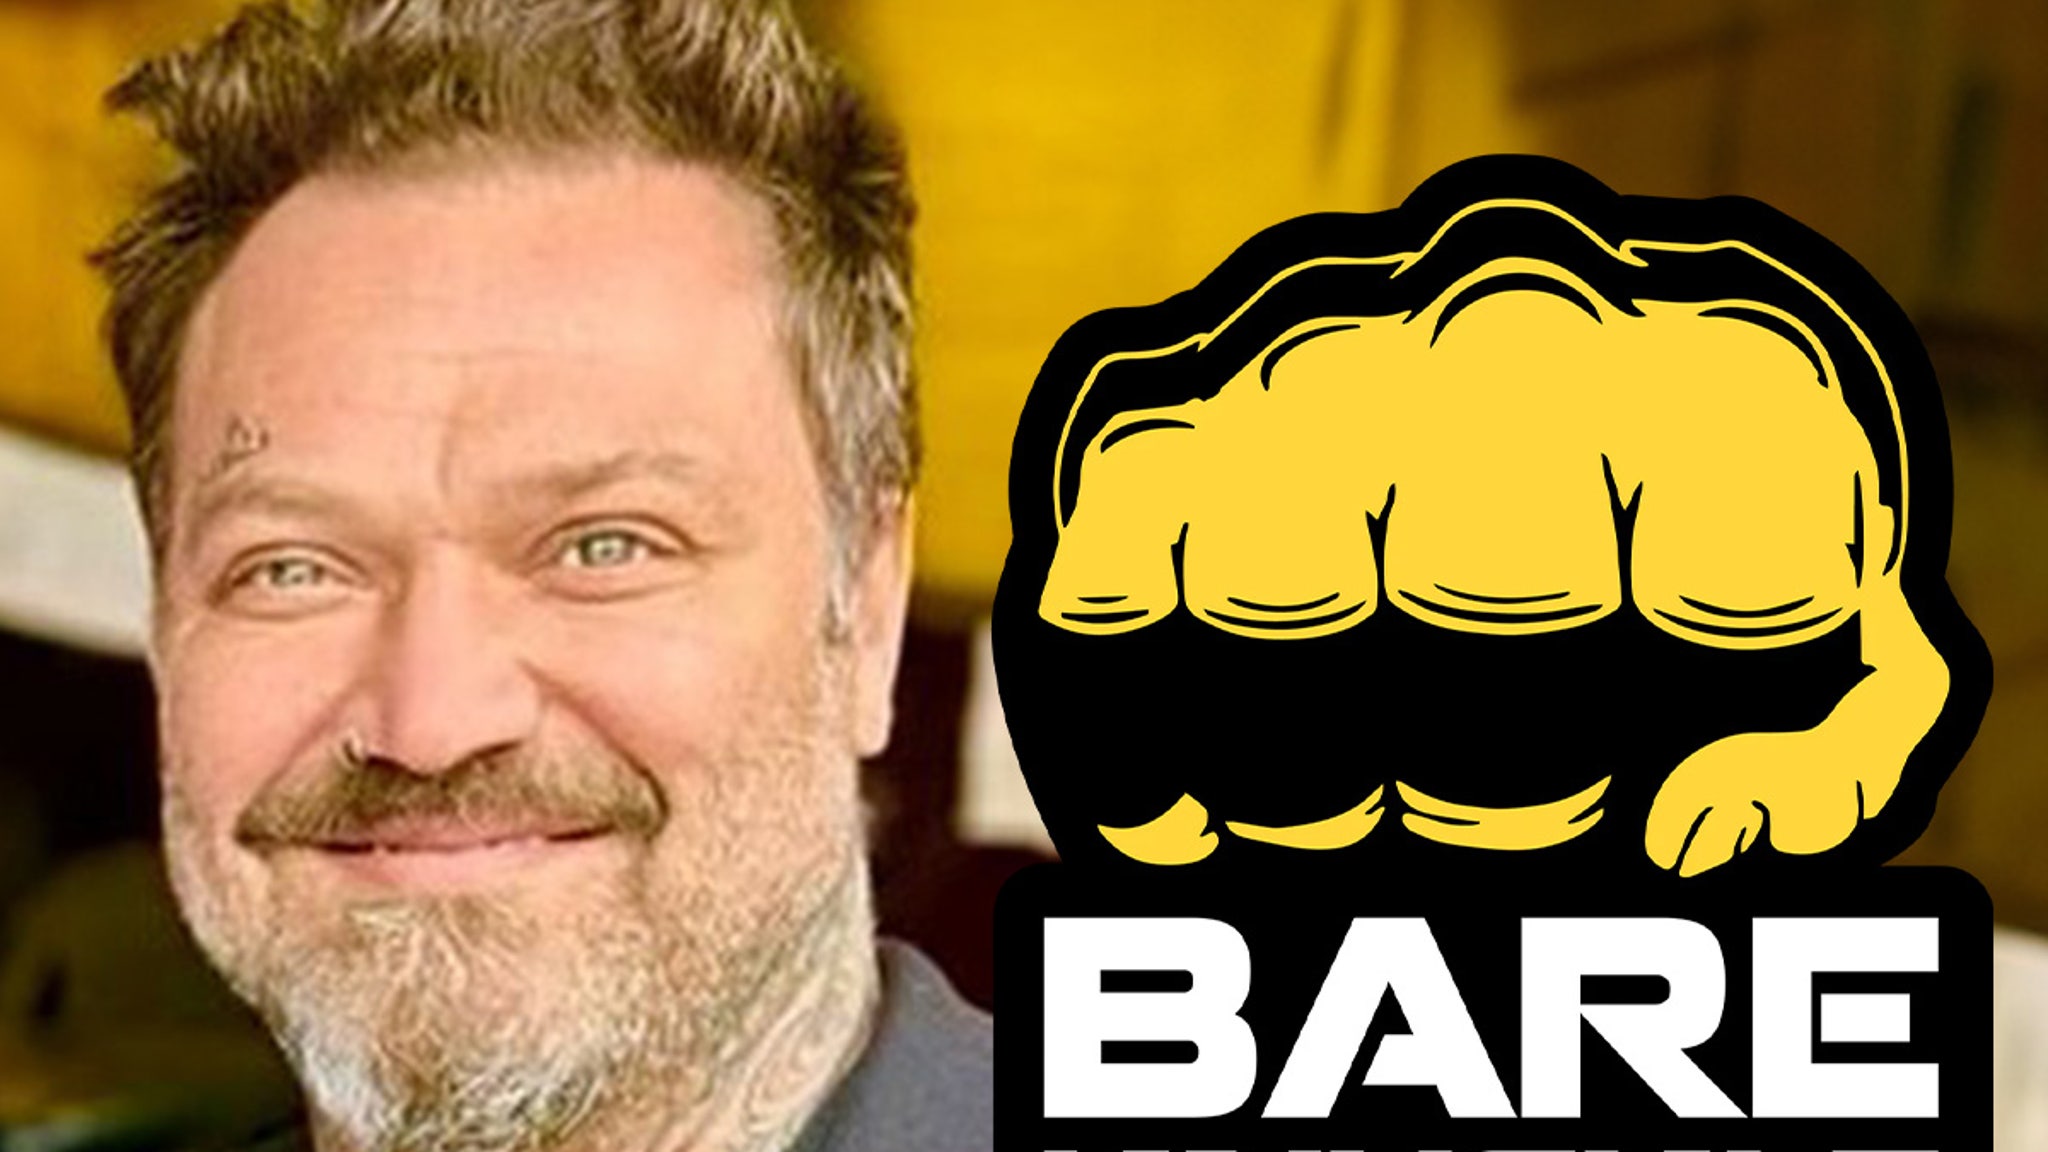 BKFC In Talks W/ Bam Margera, Looking To Add Ex-‘Jackass’ Star To Commentary Team